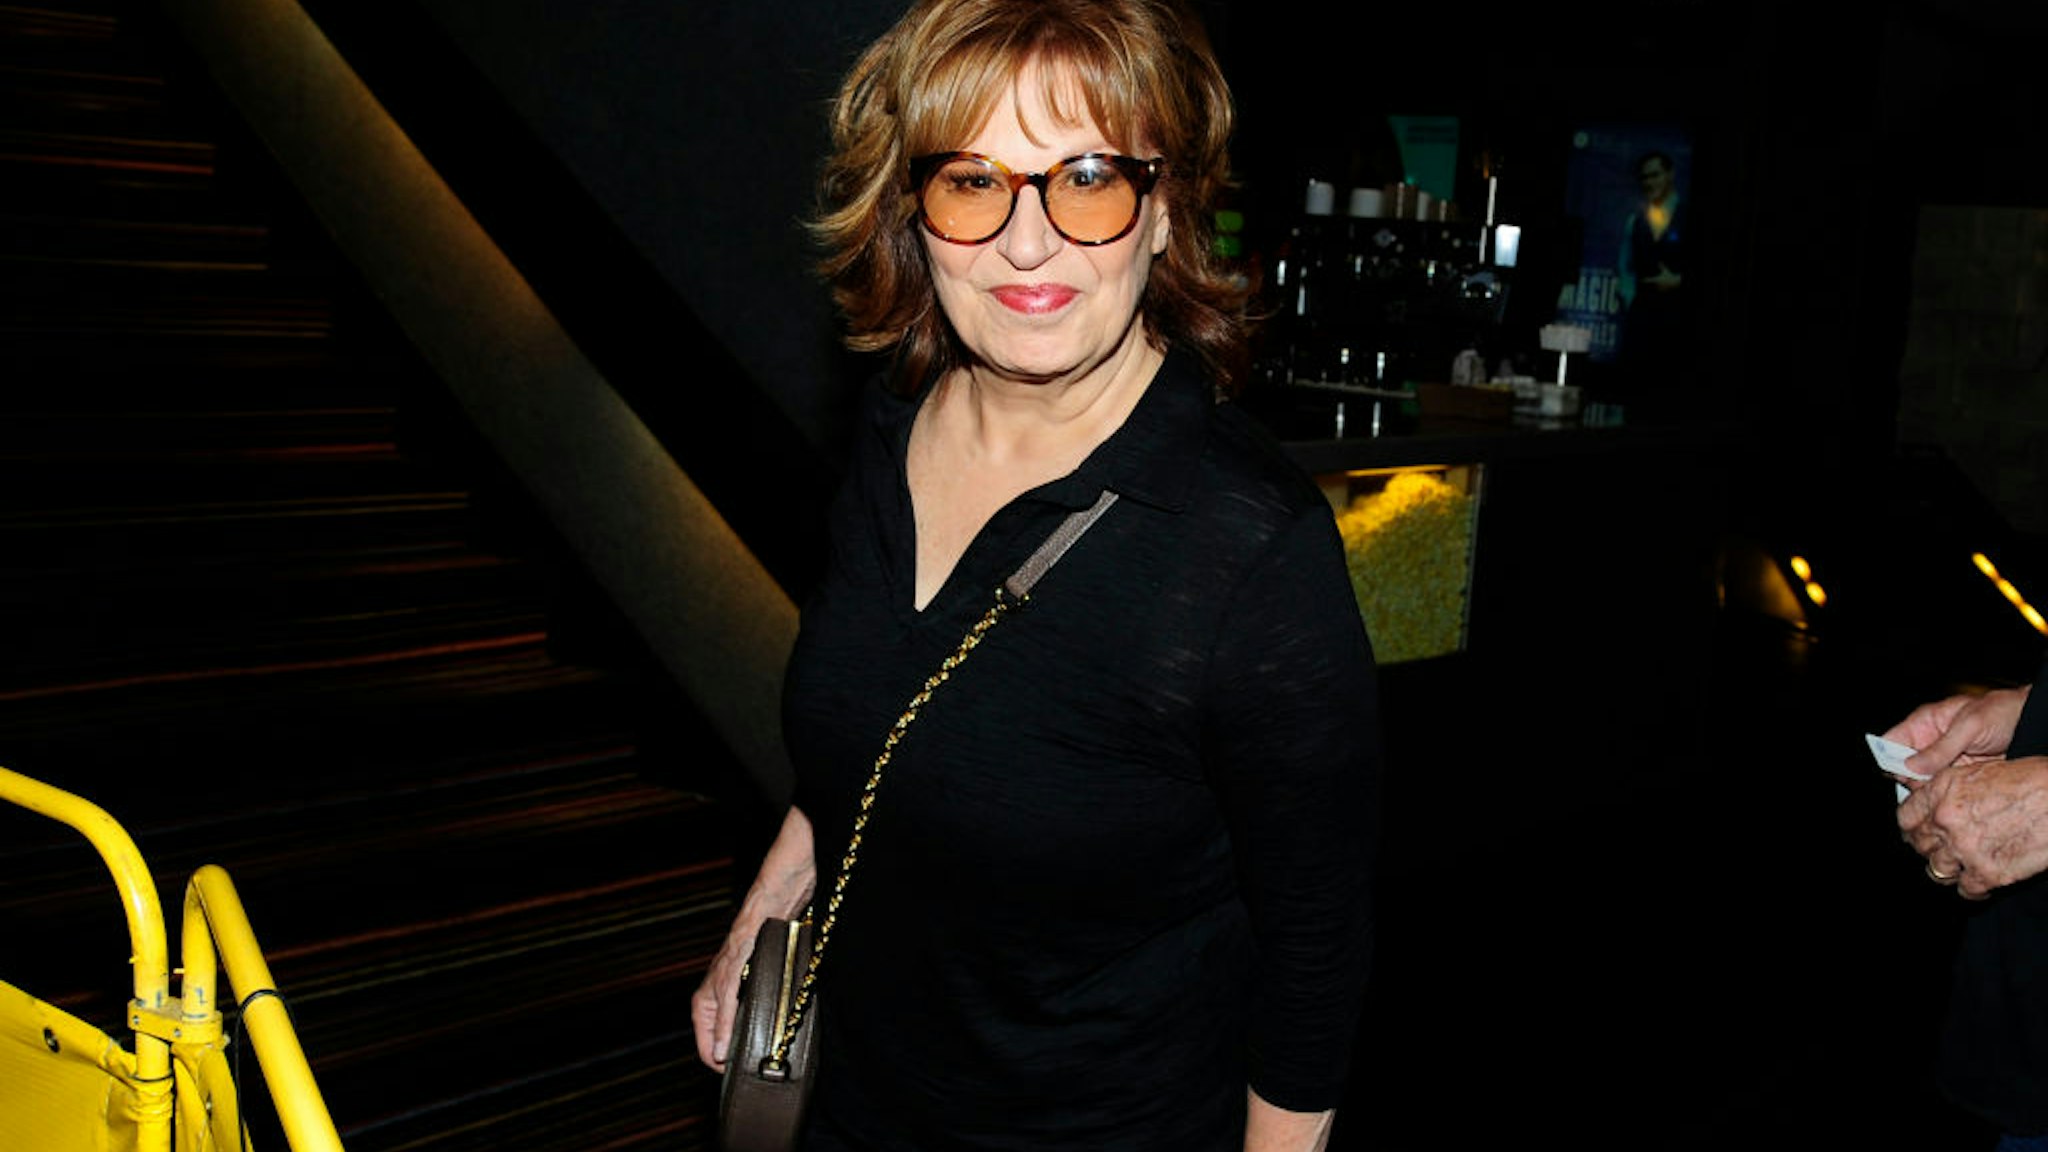 NEW YORK, NY - SEPTEMBER 3: Joy Behar attends Bergdorf Goodman And Warner Bros. Host A Special Screening Of "The Goldfinch" at Cinema 123 on September 3, 2019 in New York City. (Photo by Paul Bruinooge/Patrick McMullan via Getty Images)